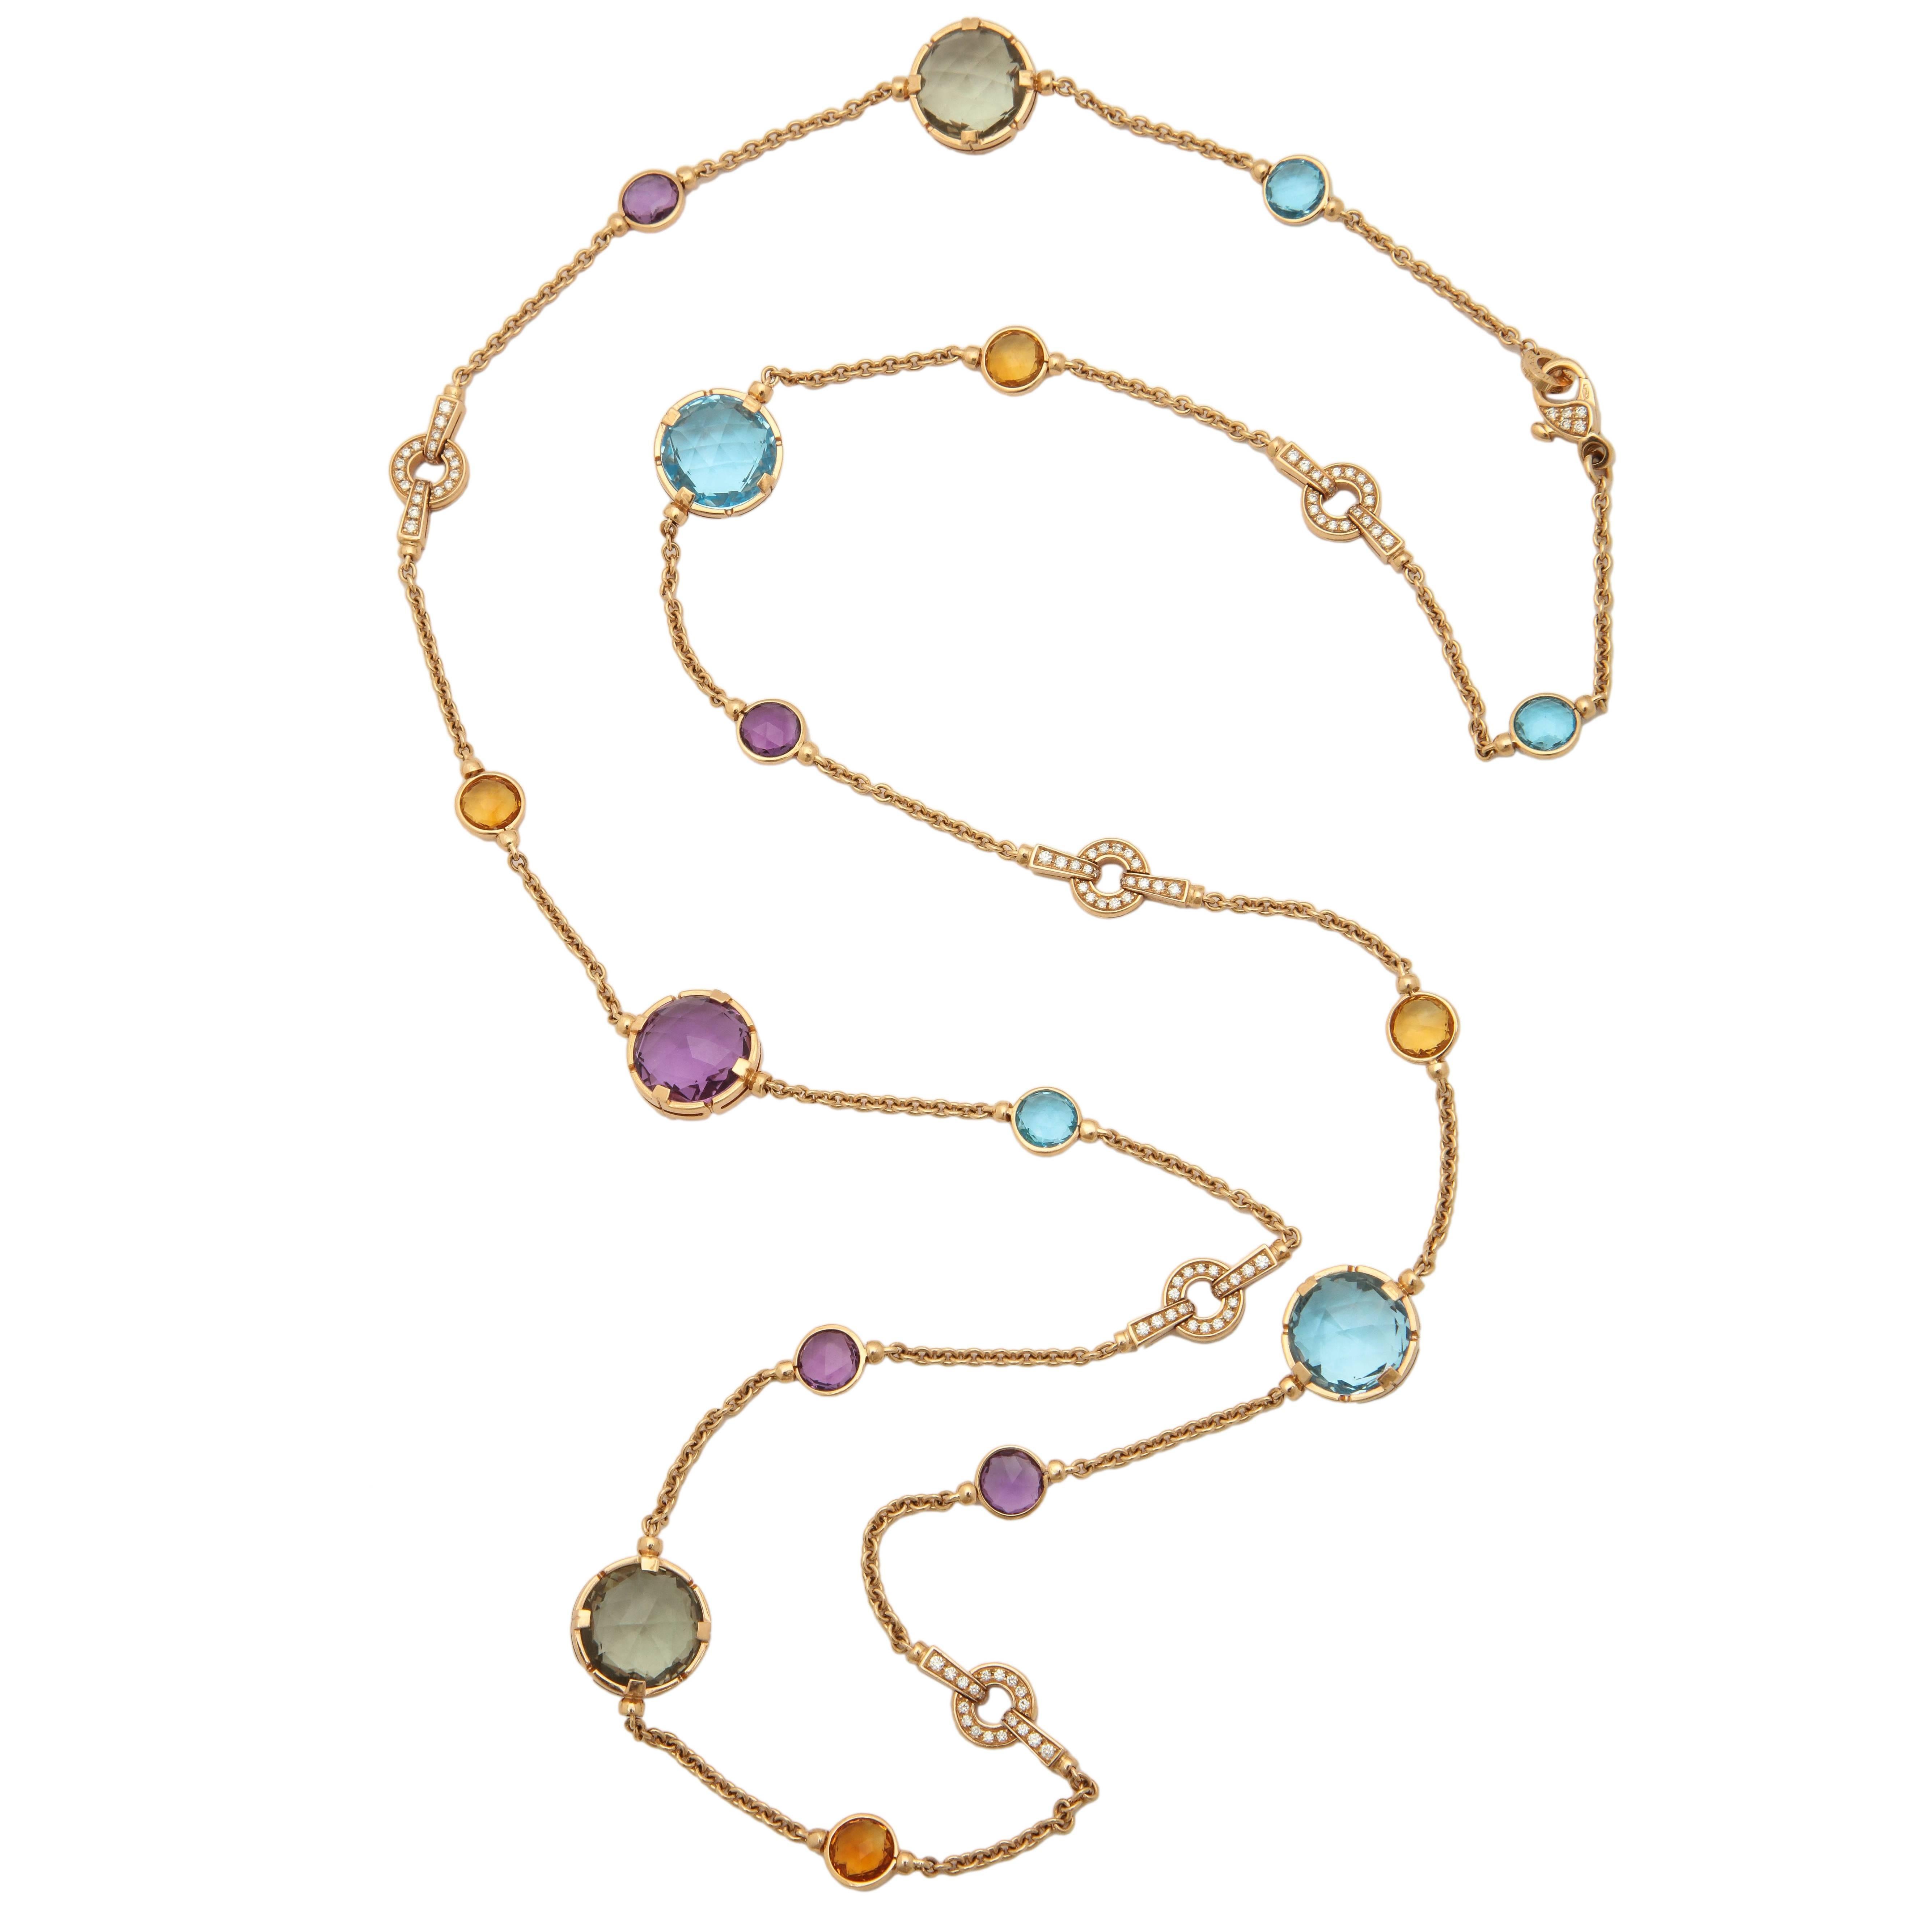 Bvlgari Multicolored Stones and Diamond Gold Link Long Chain Necklace with Clasp